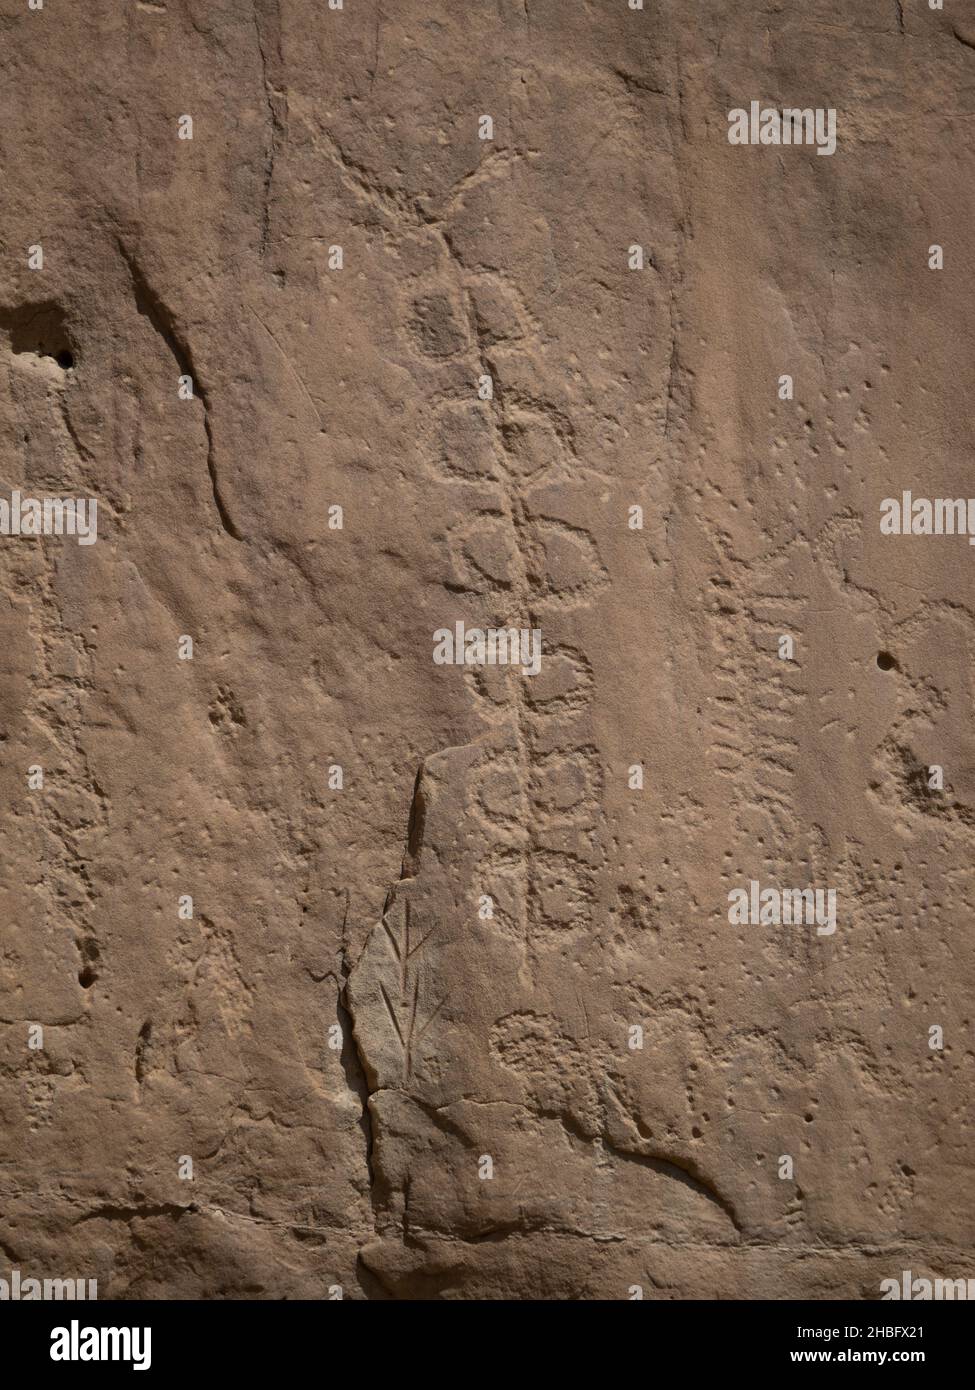 Multiple symbols carved into sandstone cliff face by Ancient Puebloans at Chaco Culture Nationa Historic Park in New Mexico. Stock Photo